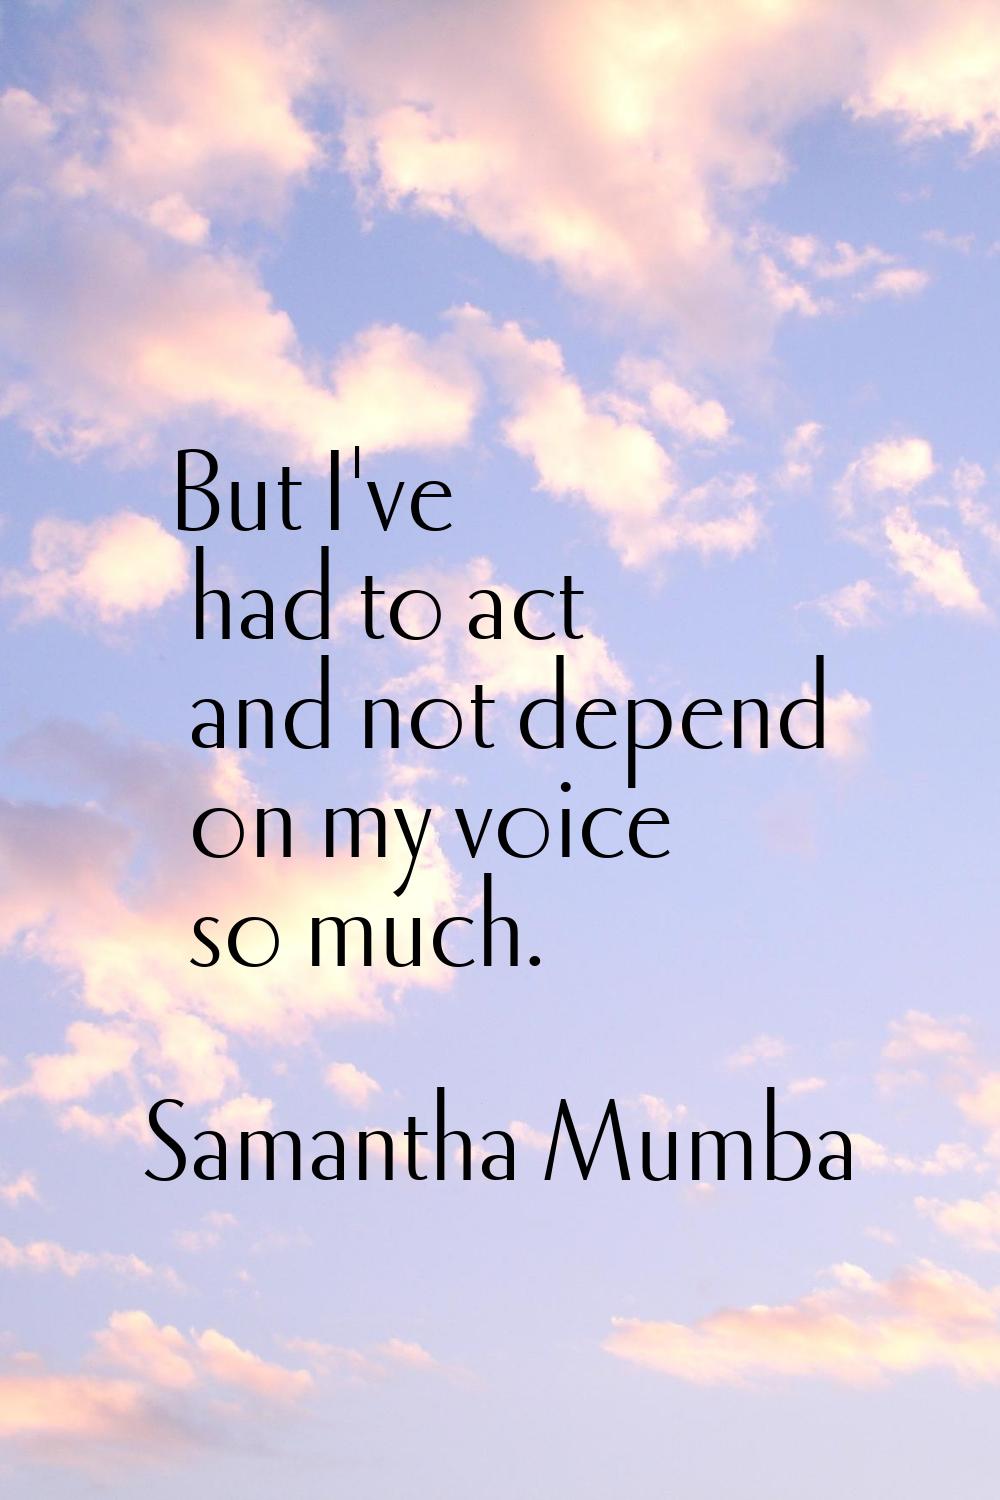 But I've had to act and not depend on my voice so much.